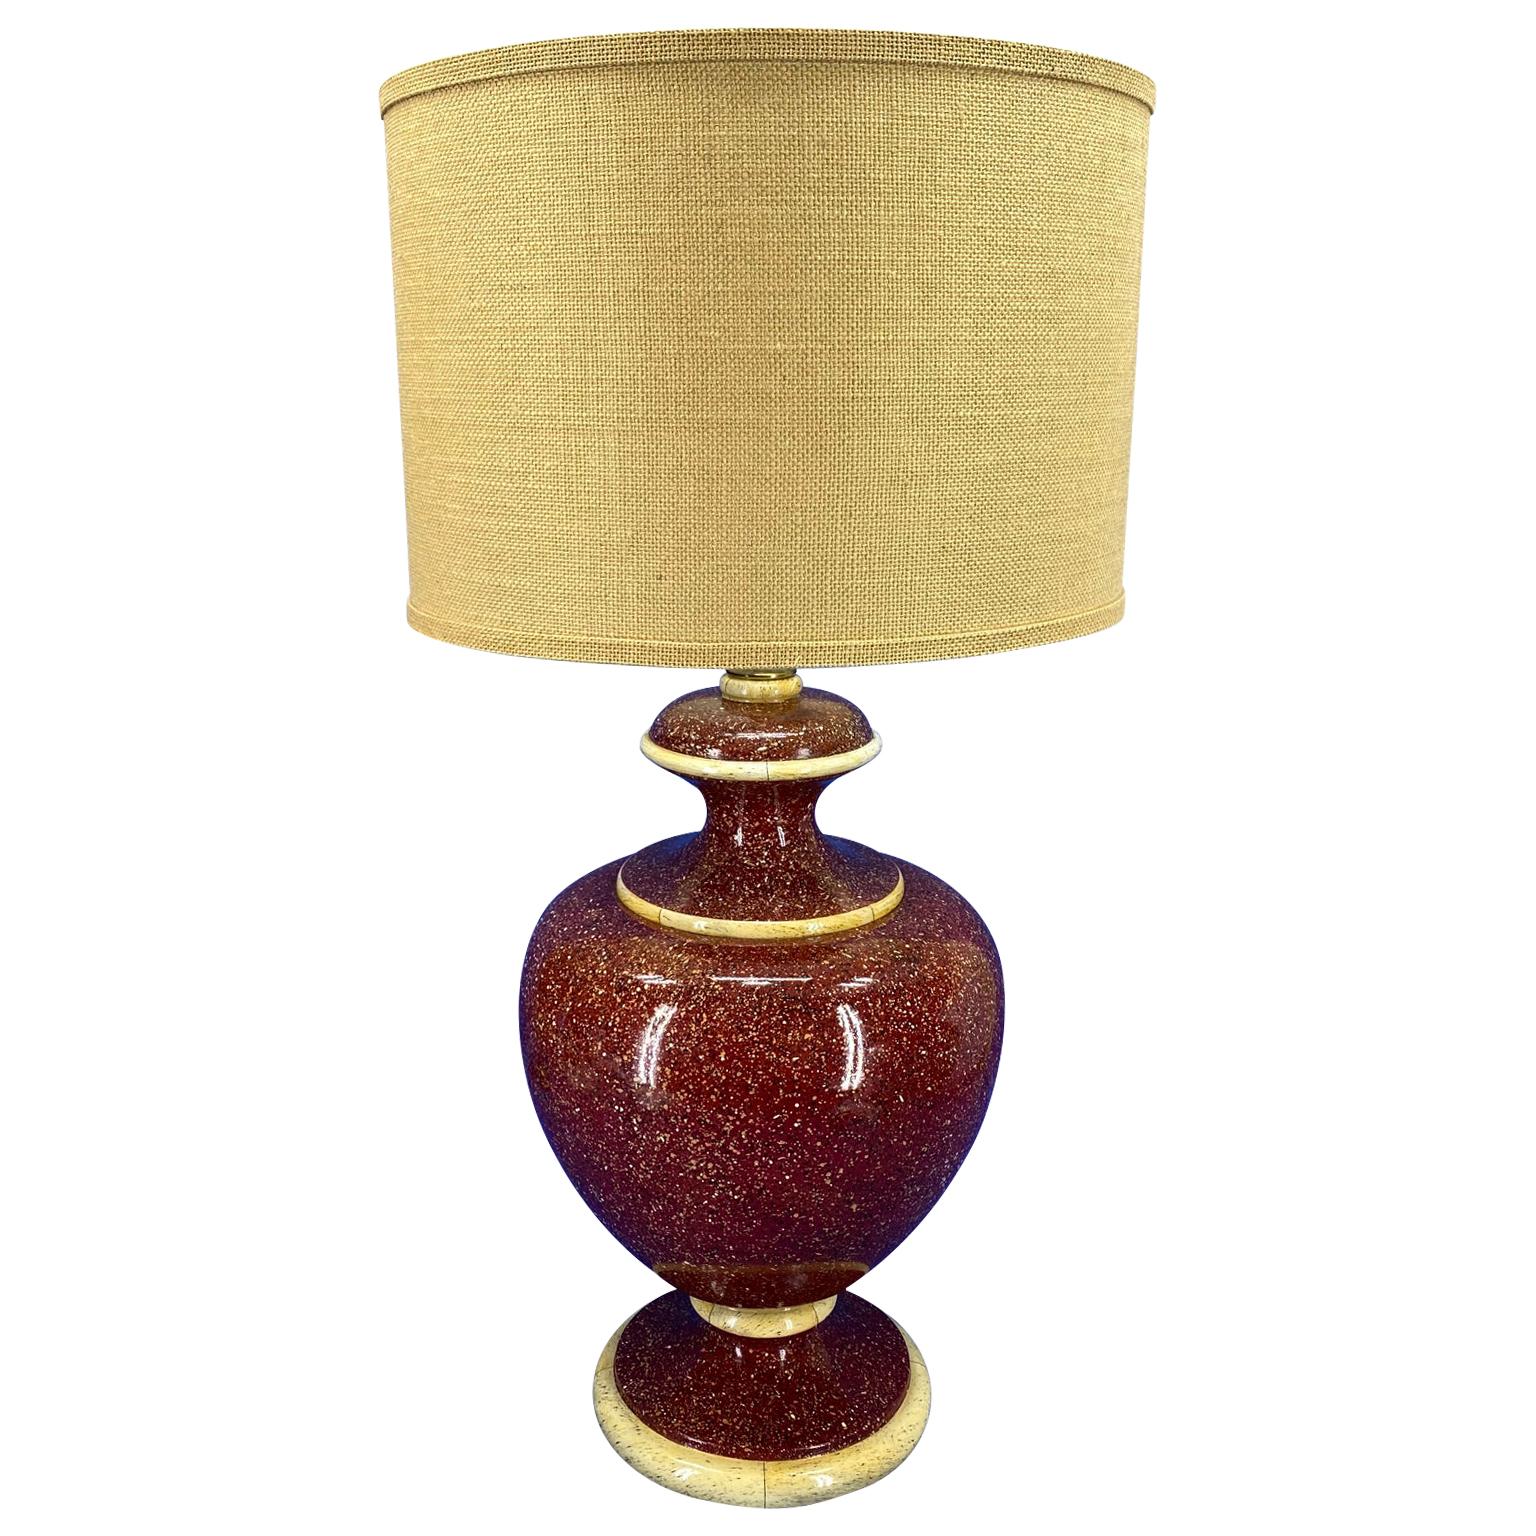 American Mid-Century Modern Red Faux Marble Urn-Shaped Table Lamp